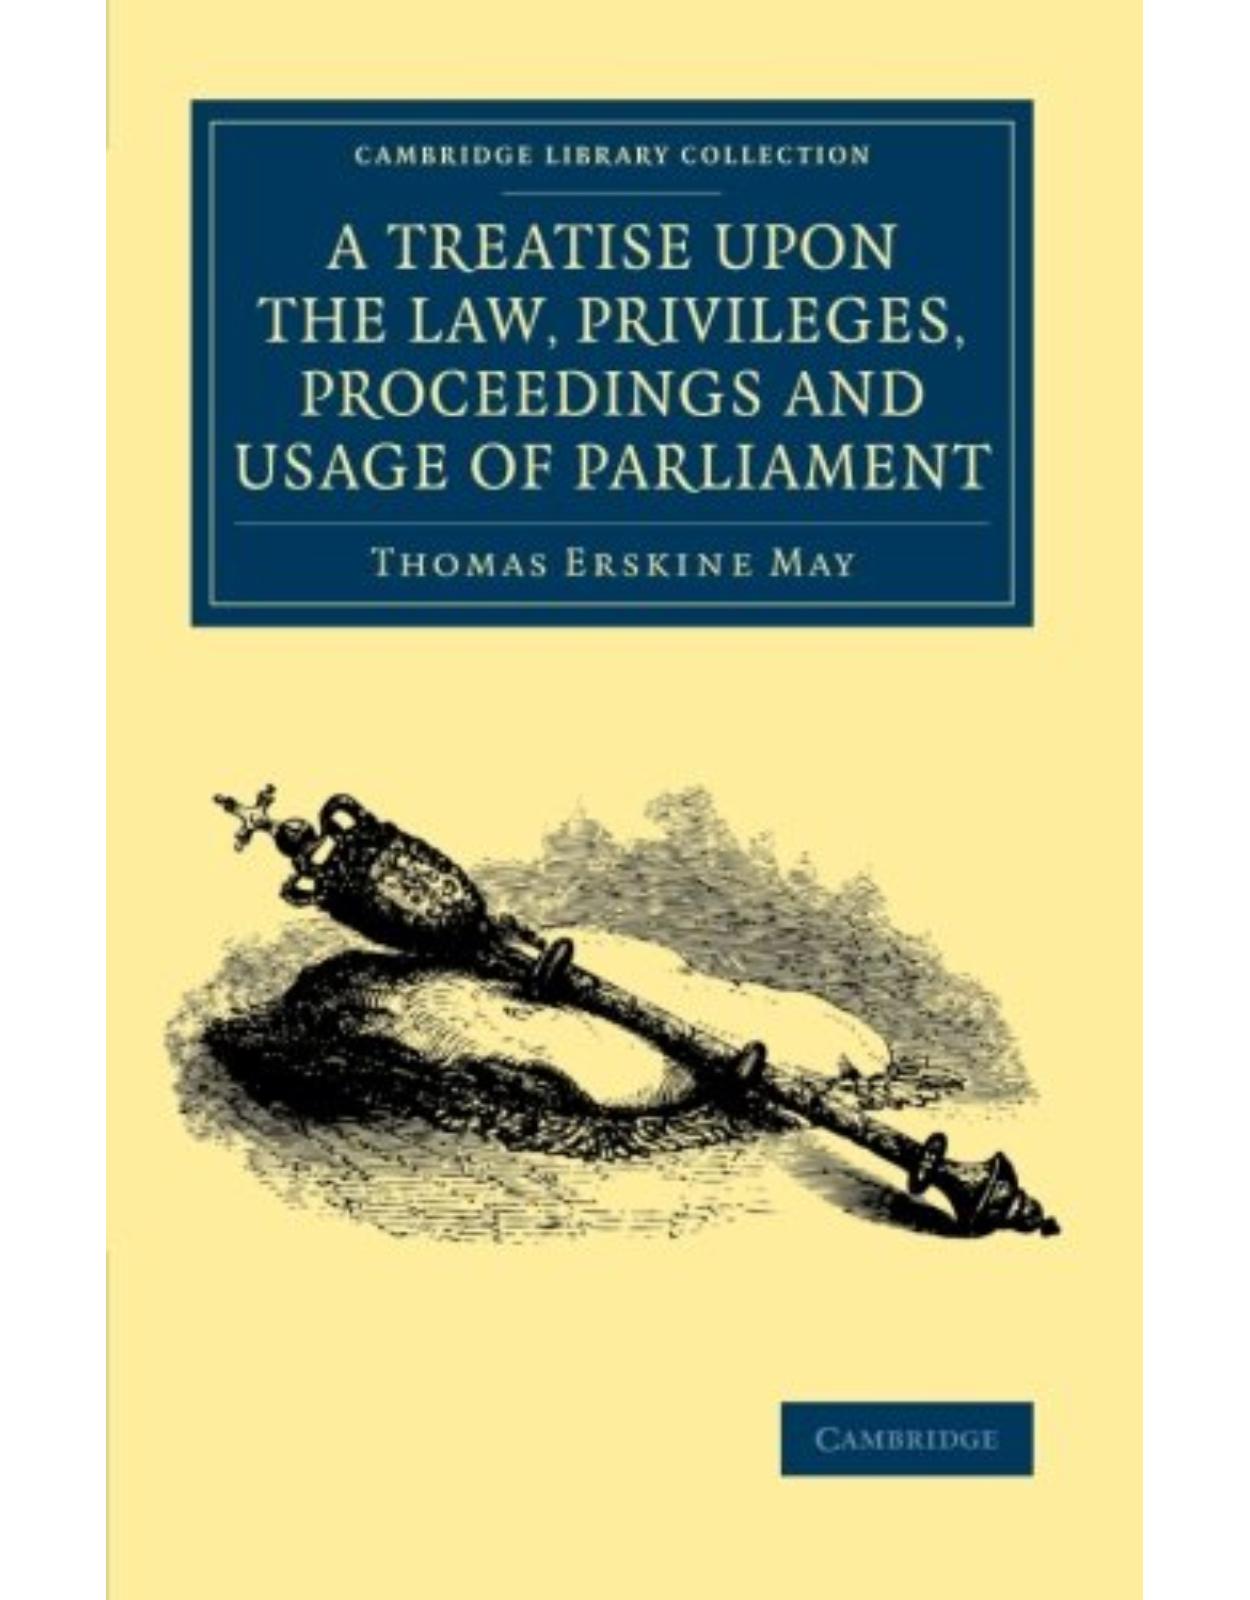 A Treatise upon the Law, Privileges, Proceedings and Usage of Parliament (Cambridge Library Collection - British and Irish History, 19th Century)